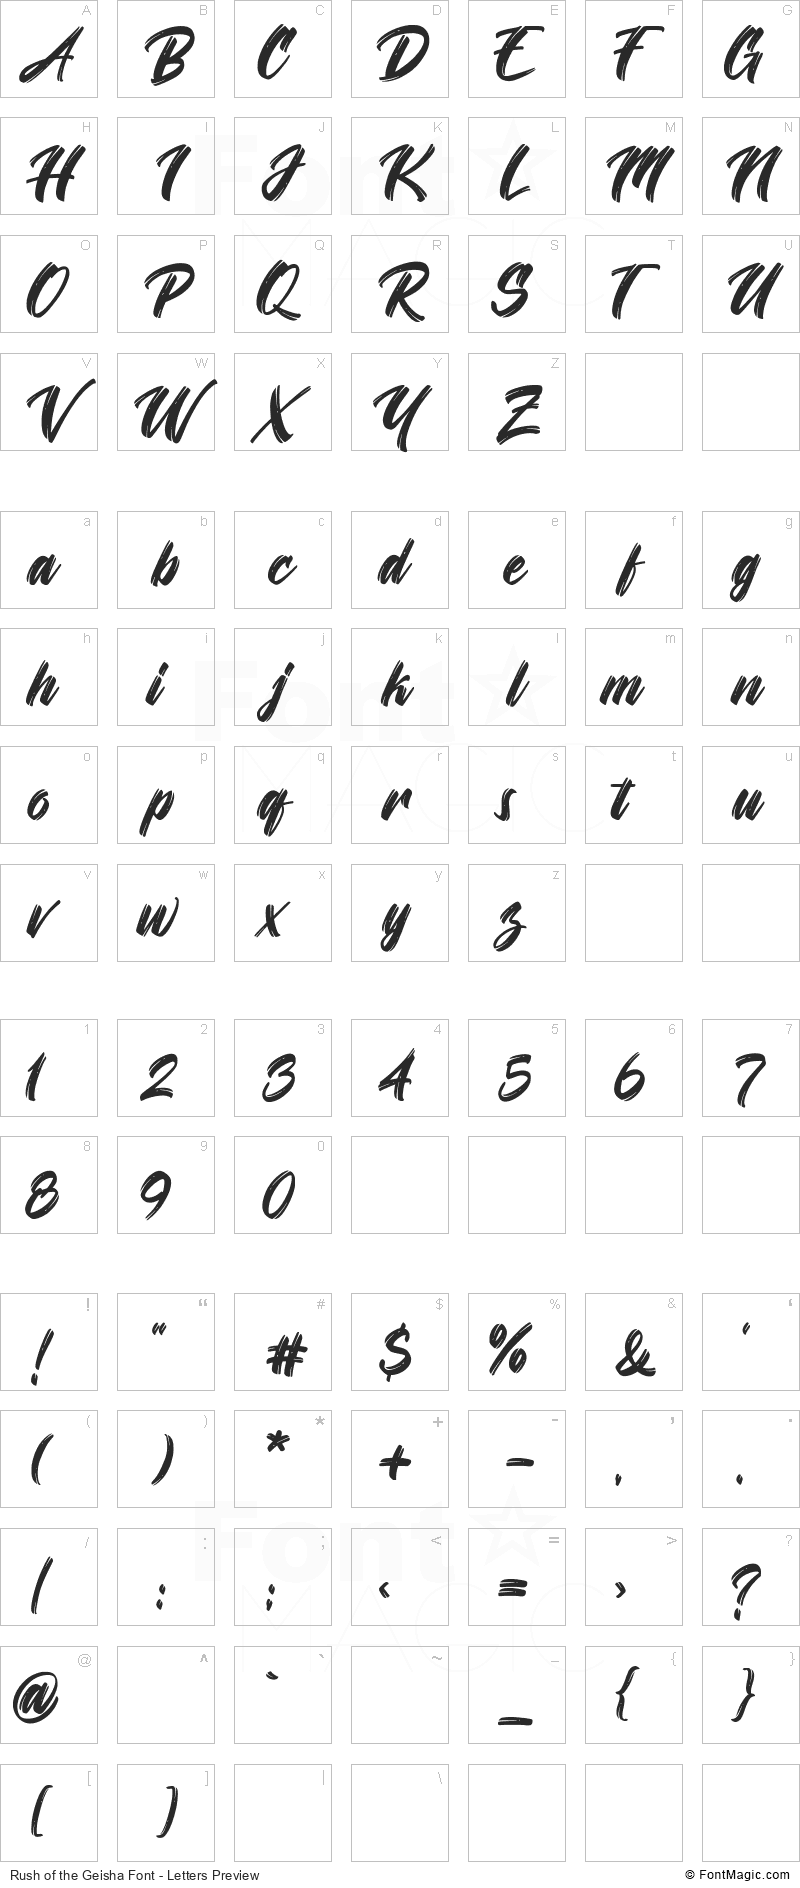 Rush of the Geisha Font - All Latters Preview Chart